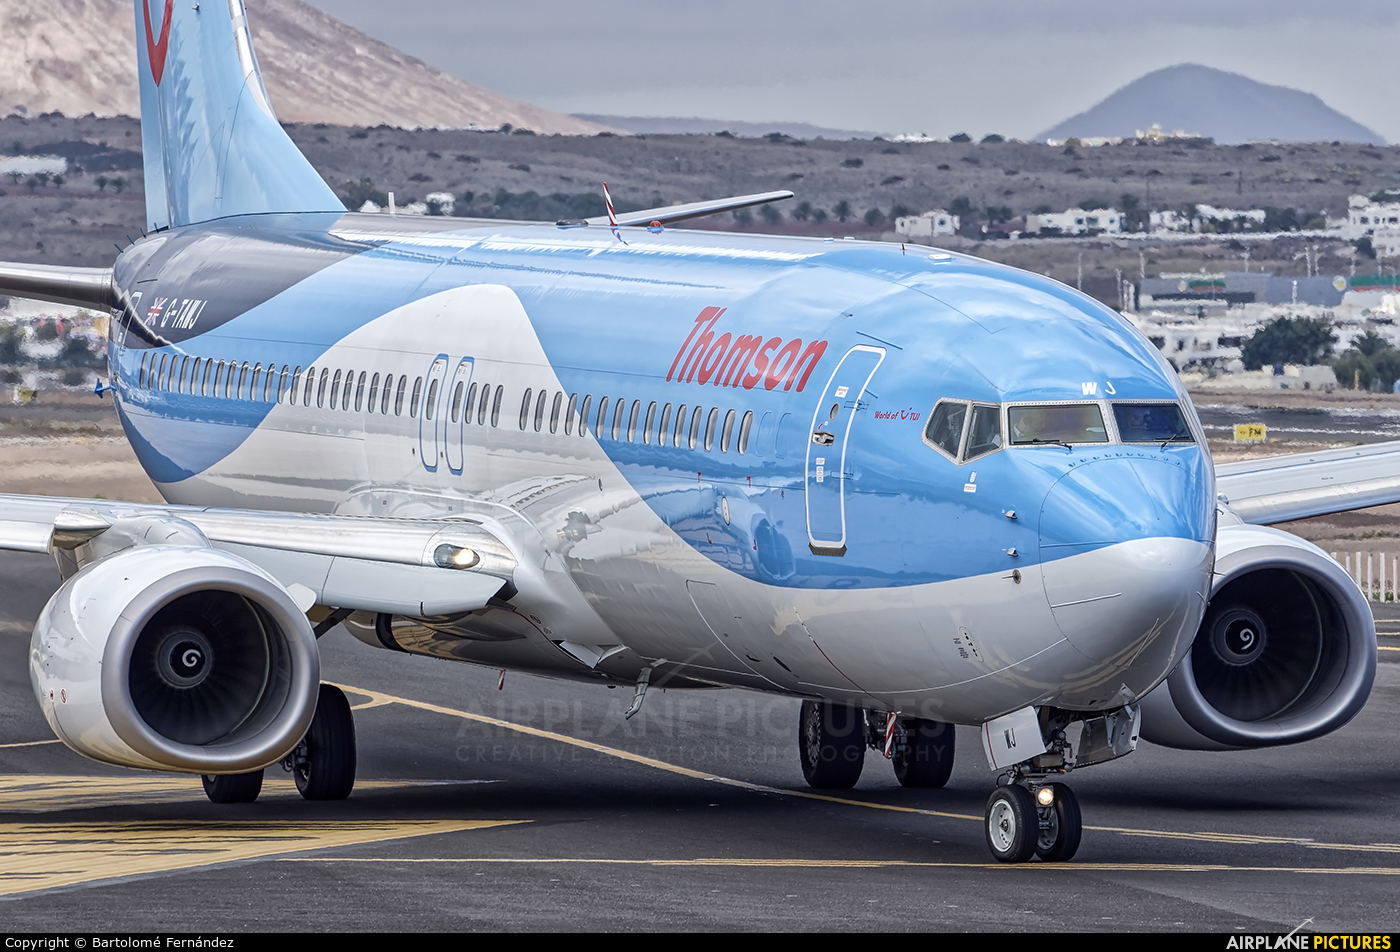 Thomson/Thomsonfly G-TAWJ aircraft at Lanzarote - Arrecife